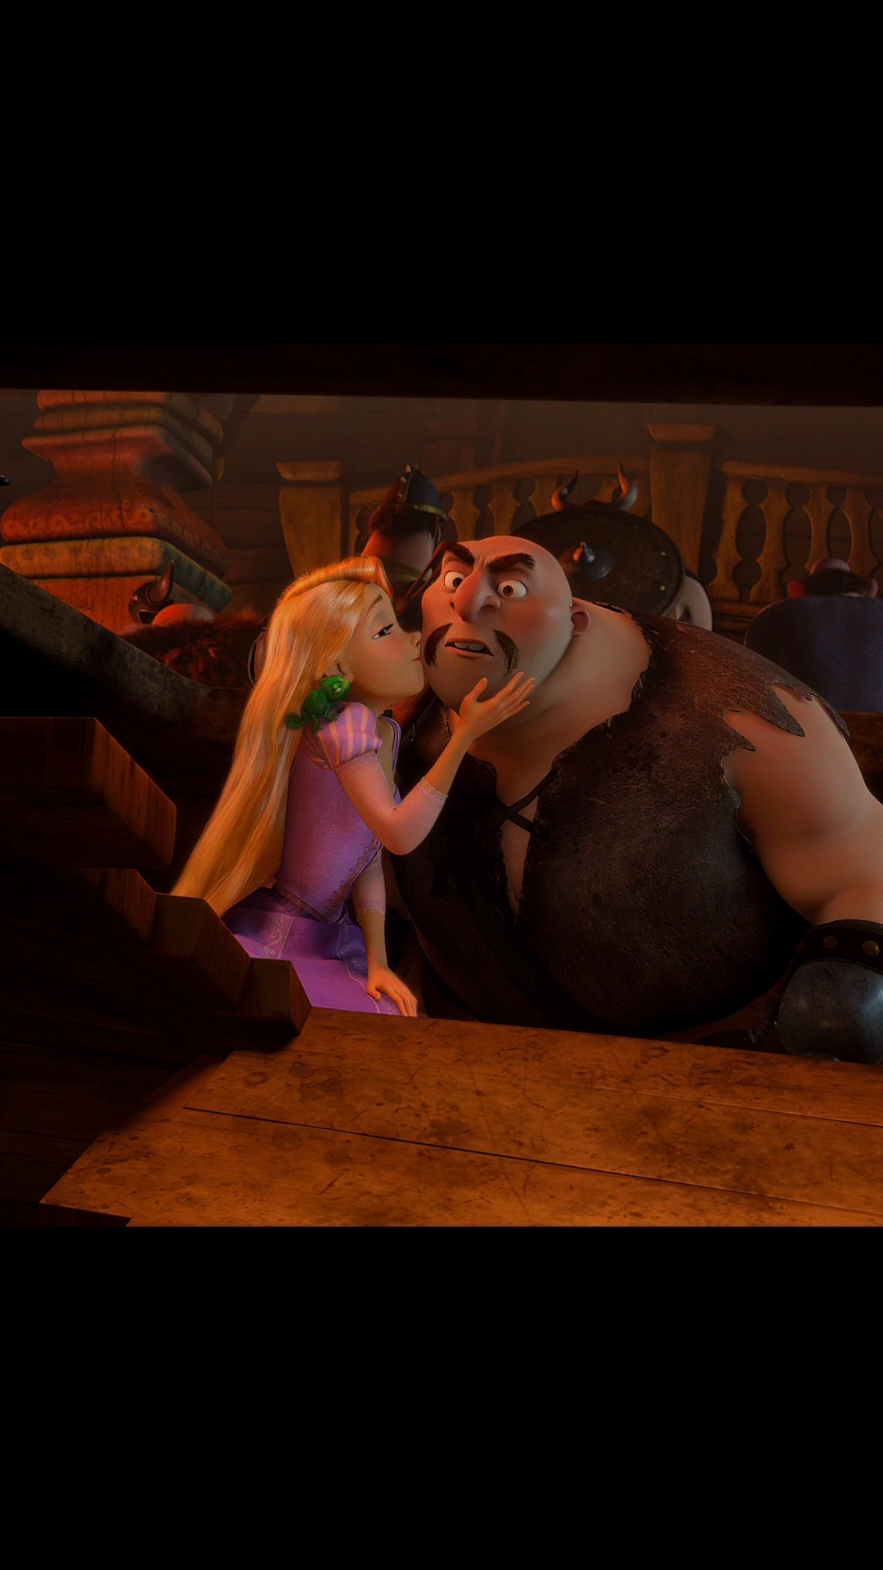 Tangled #movieclips #tangled #fyp #foryoupage #viral#film #foryou #movie #foryoupage #movieclips 